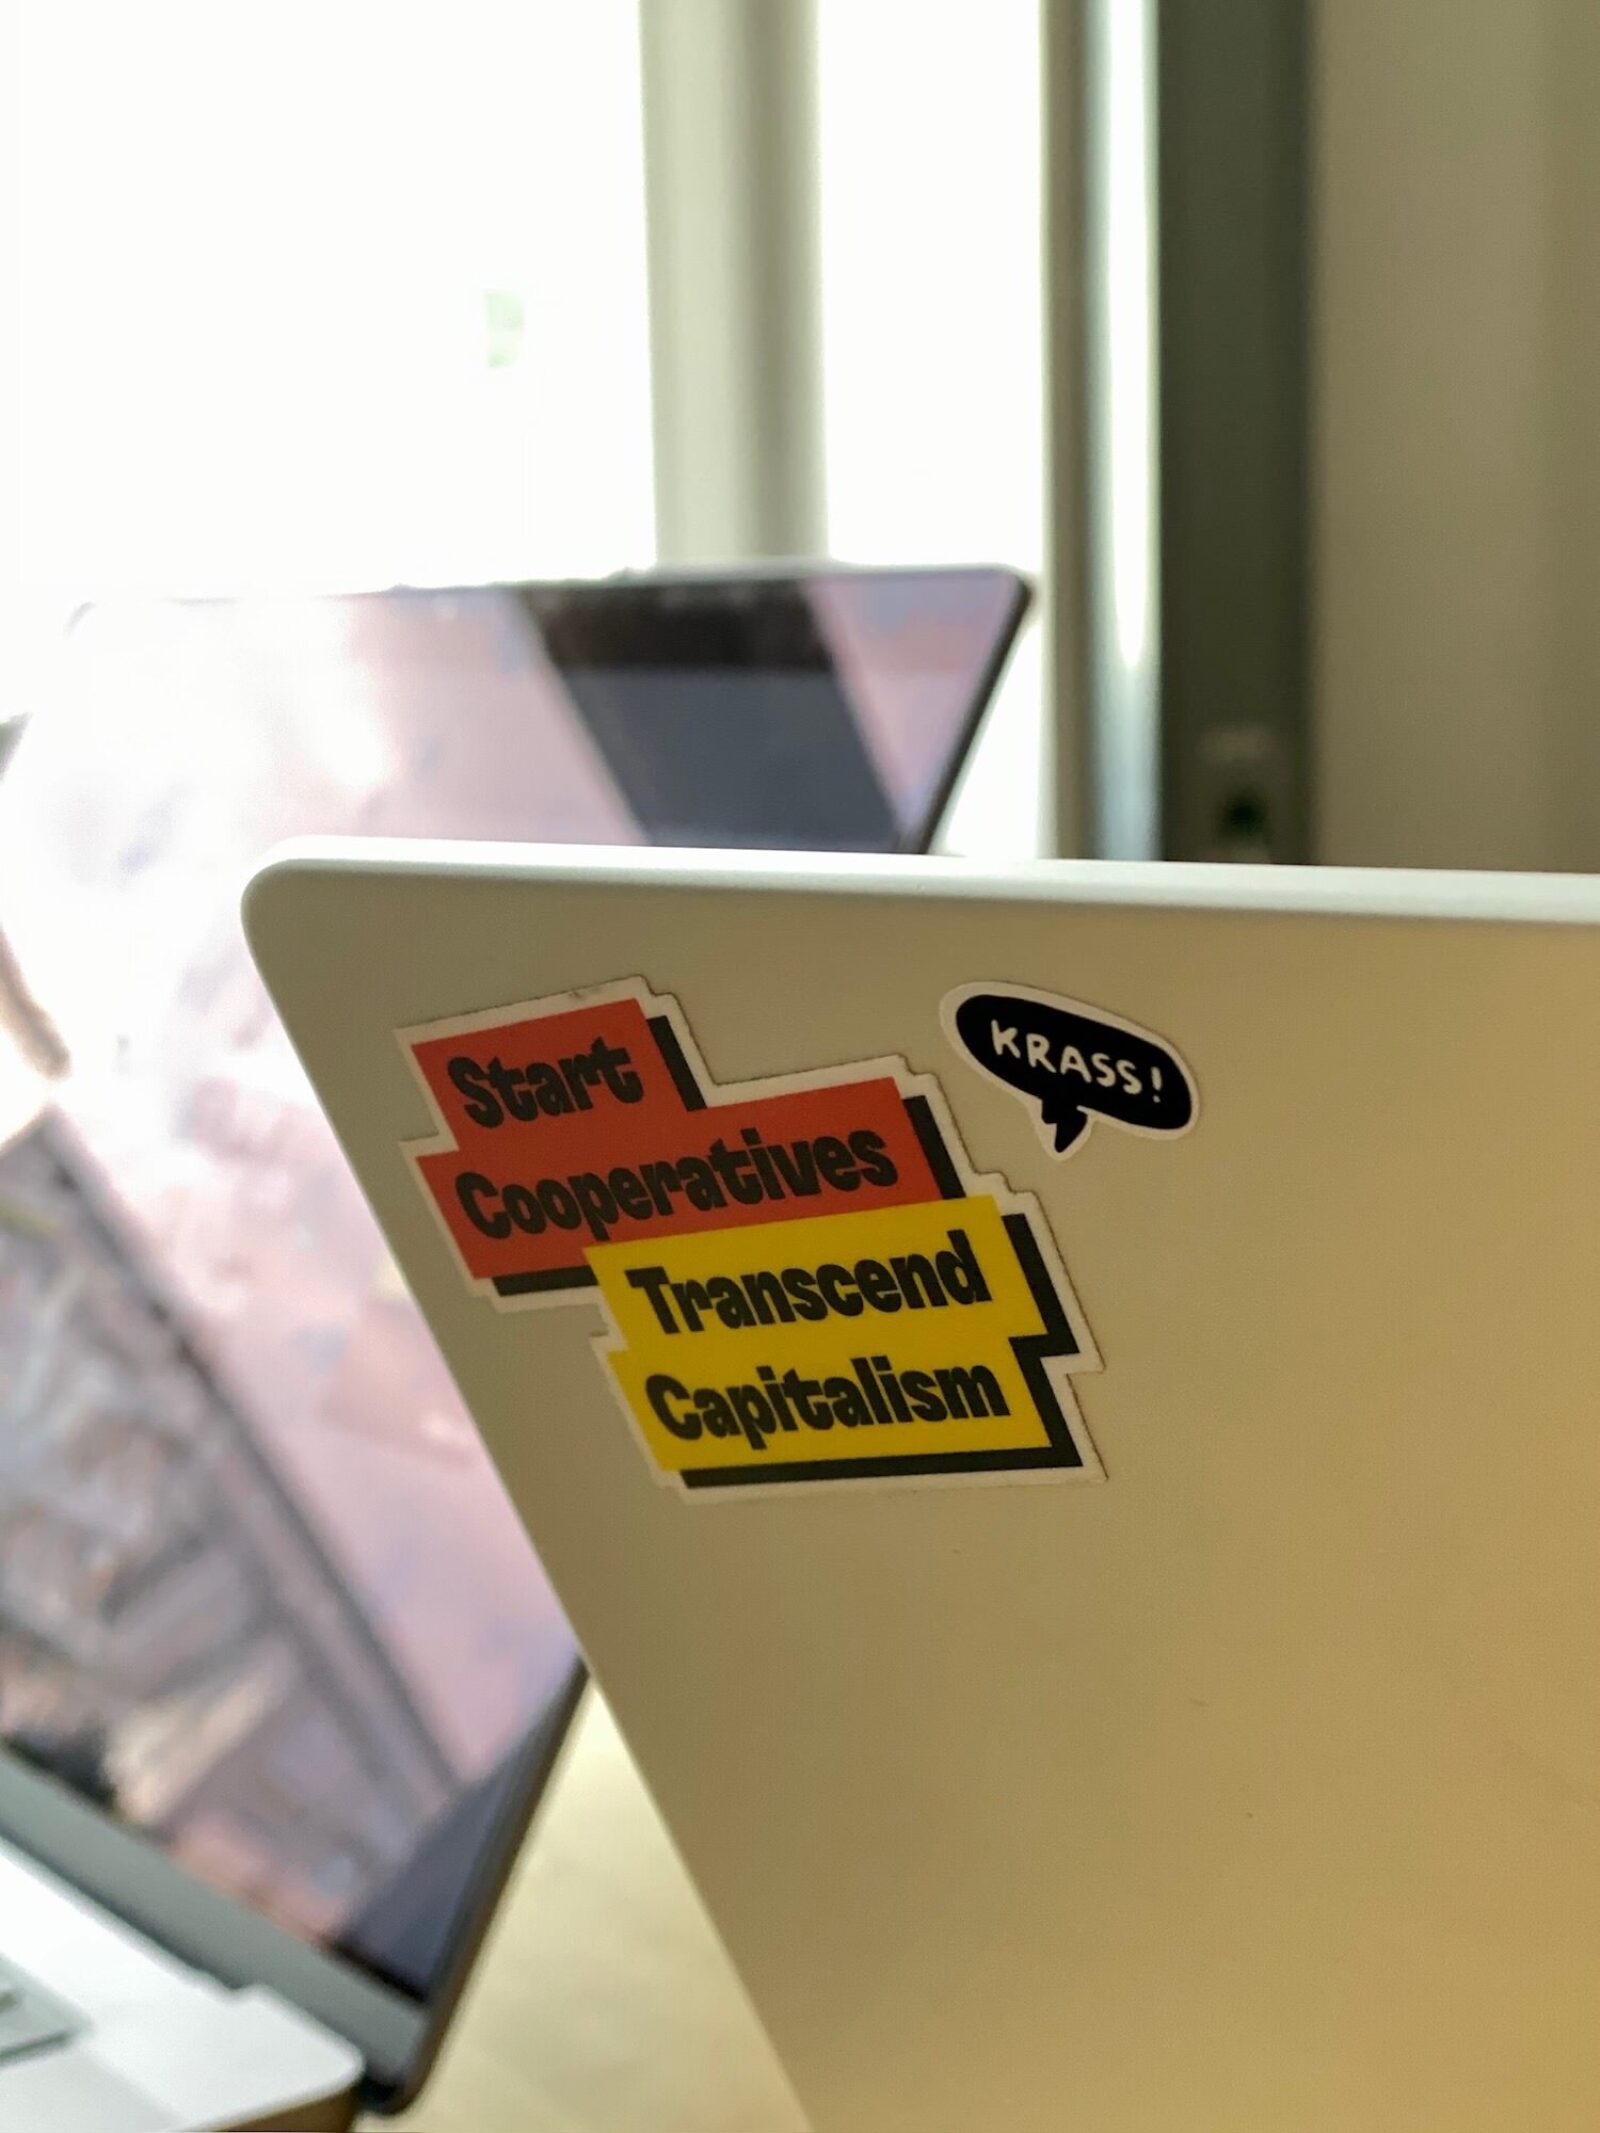 Photo of a laptop with stickers on it, stating “Start Cooperatives, Transcend Capitalism” and another one that says “Krass”